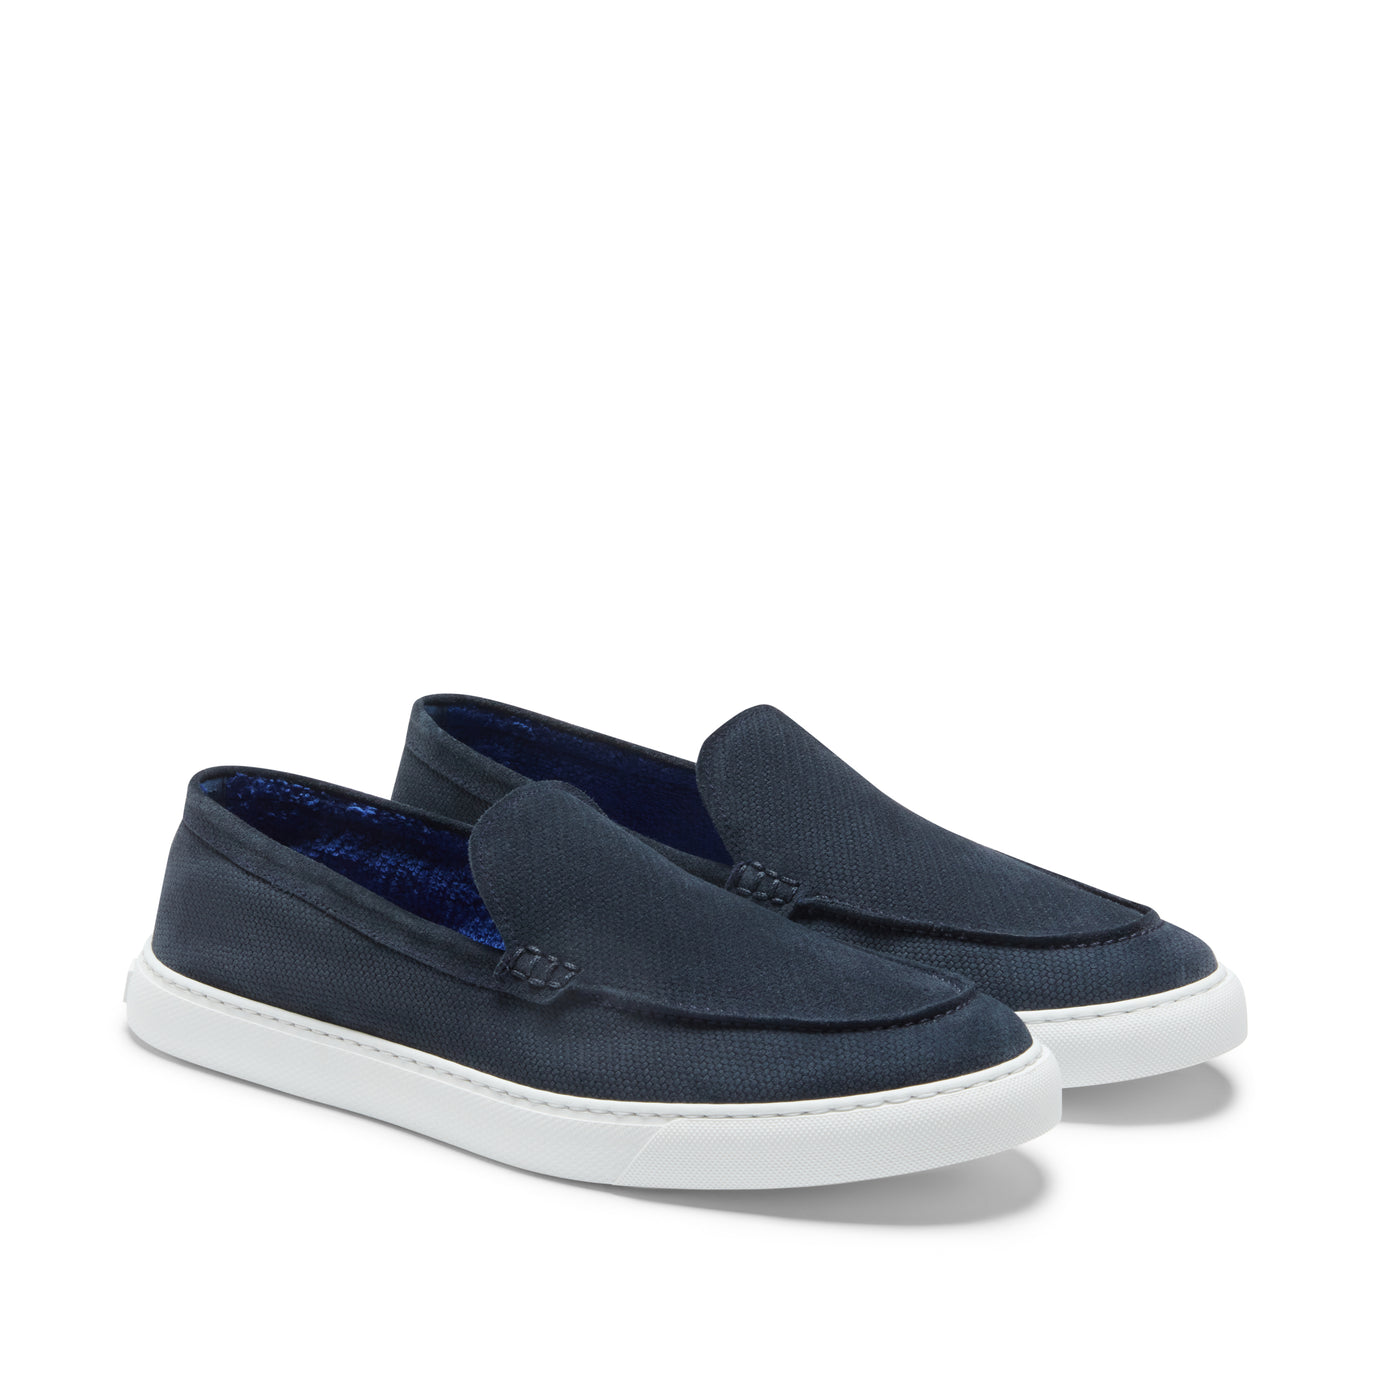 Shop The Latest Collection Of Fratelli Rossetti Fr M Loafer-51992 In Lebanon